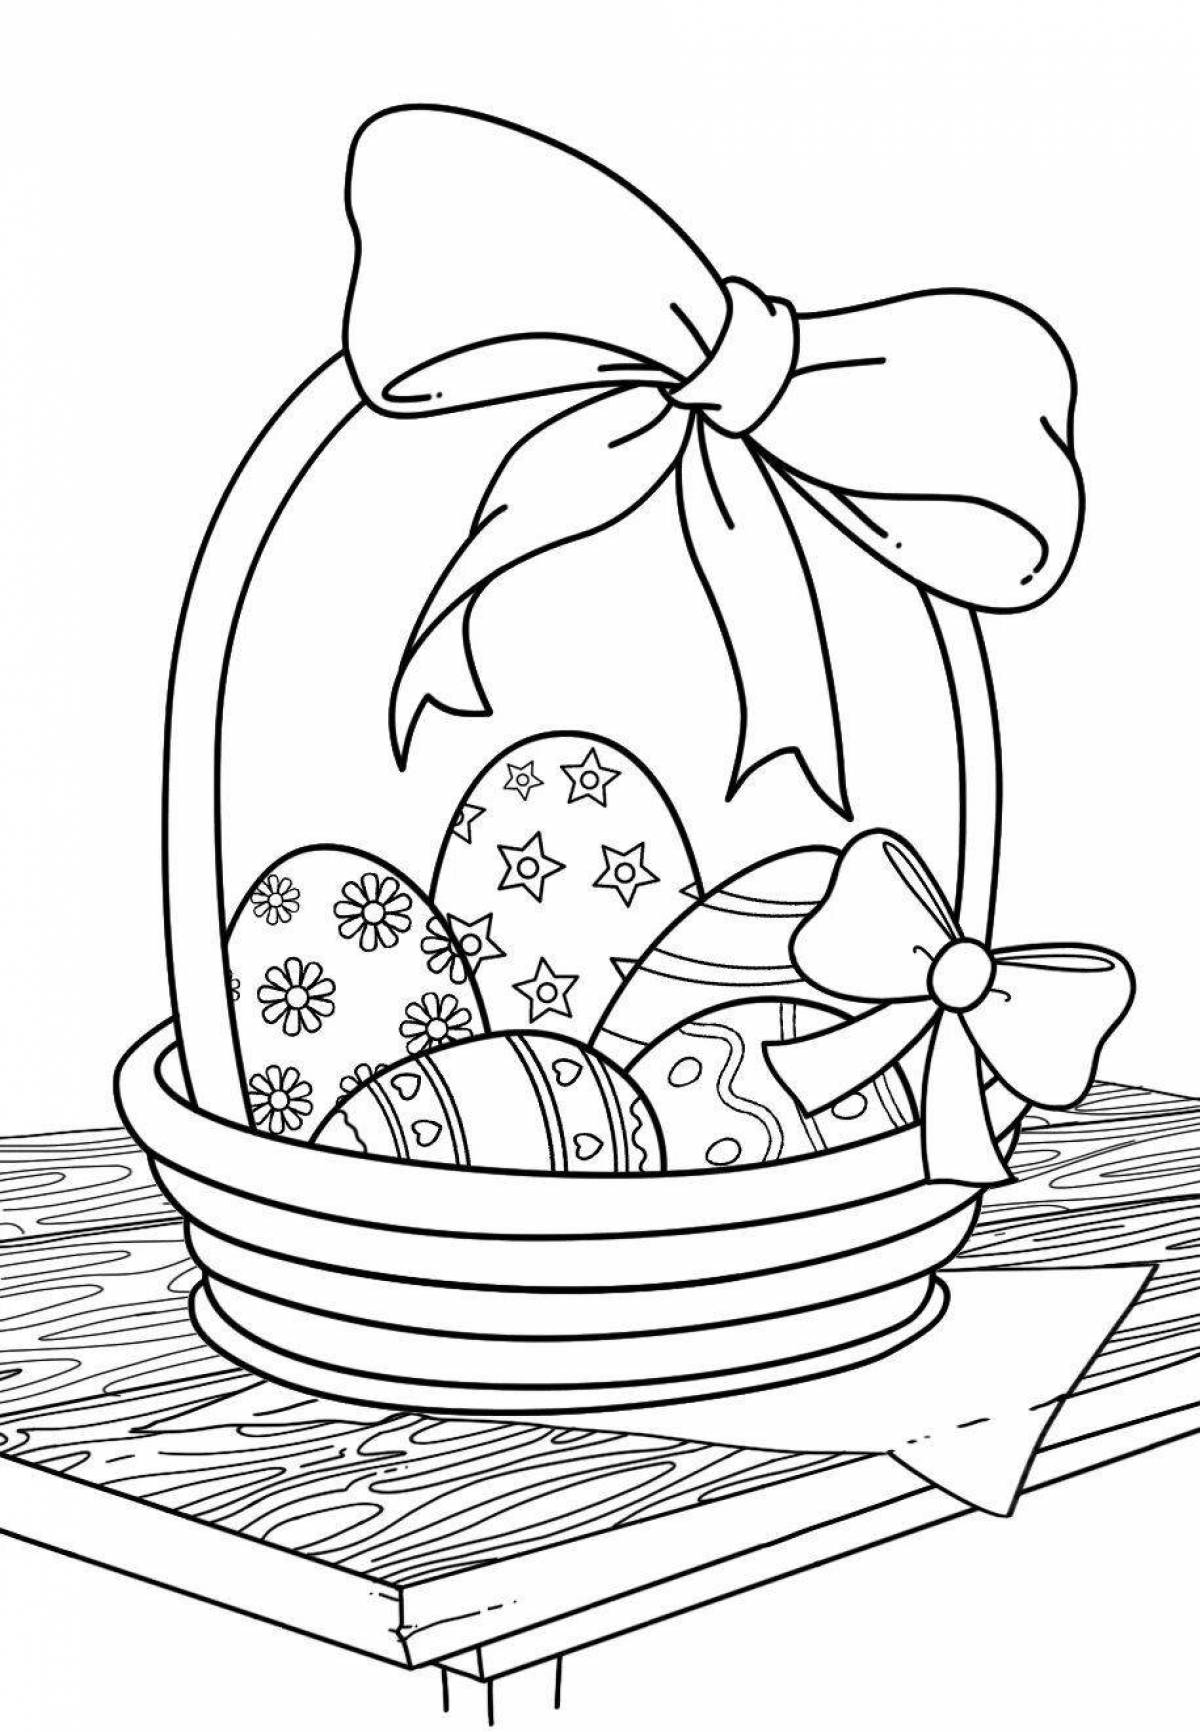 Animated coloring pages with easter symbols